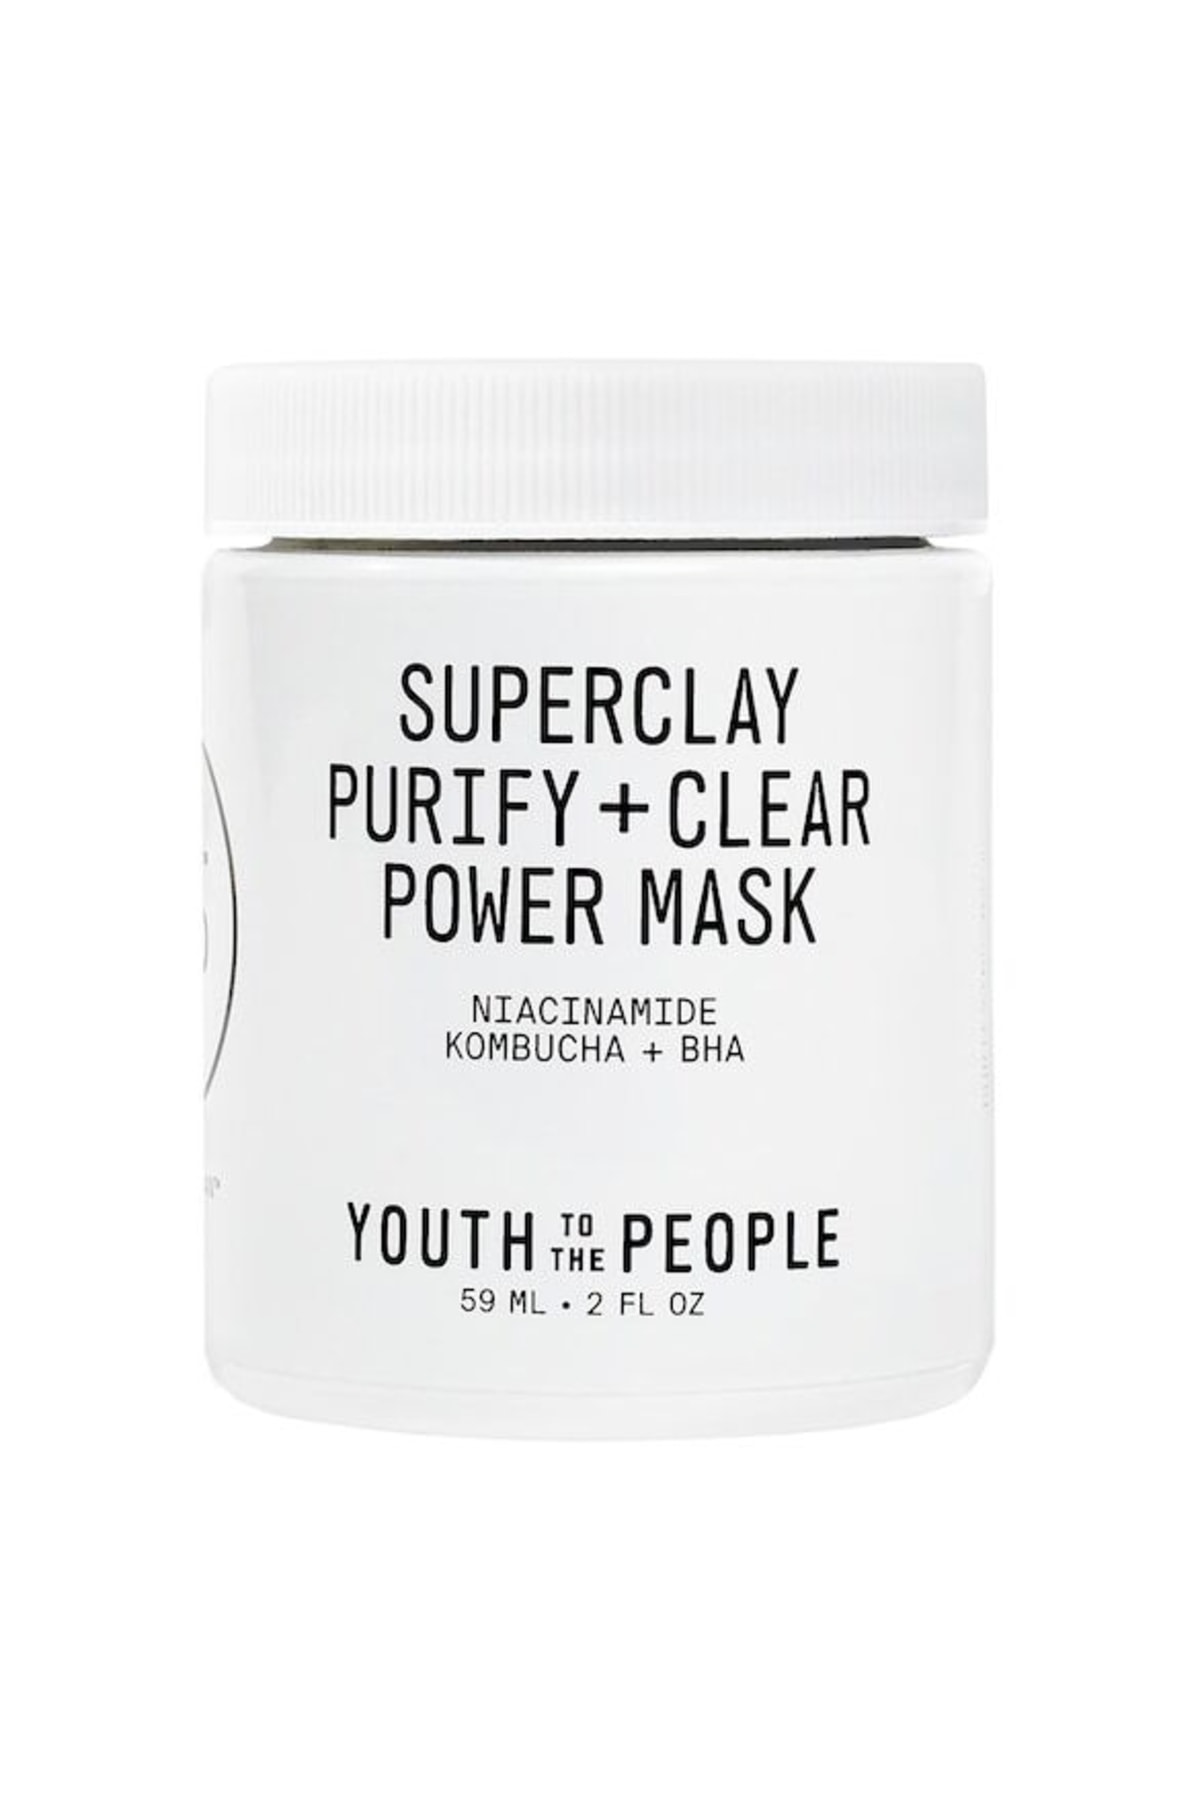 youth to the people Superclay Purify + Clear Power Mask - Maske